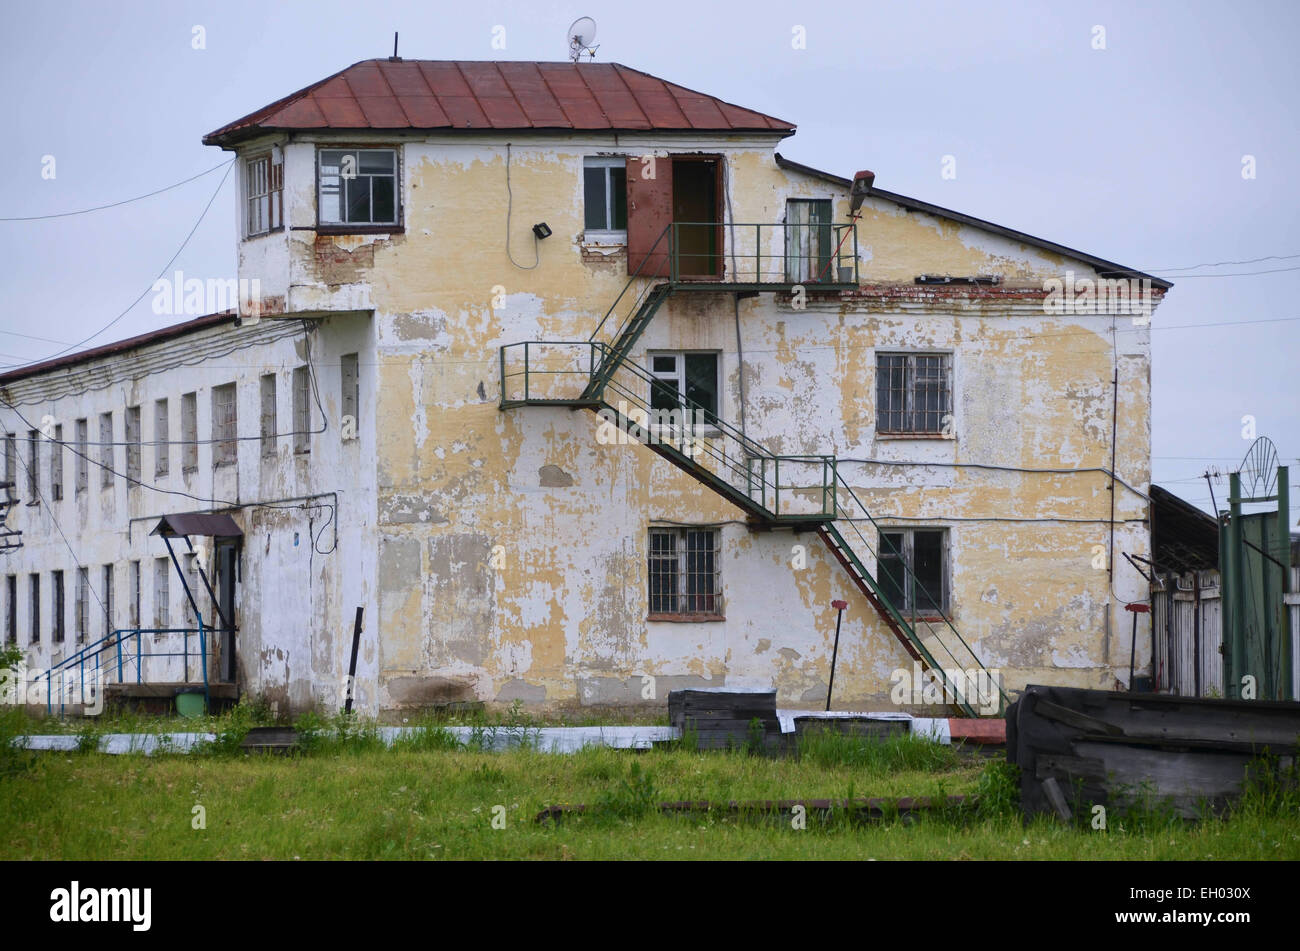 The former soviet gulag camp of Perm36, west of the Ural range in Russia  near the town of Perm. Administrative building Stock Photo - Alamy